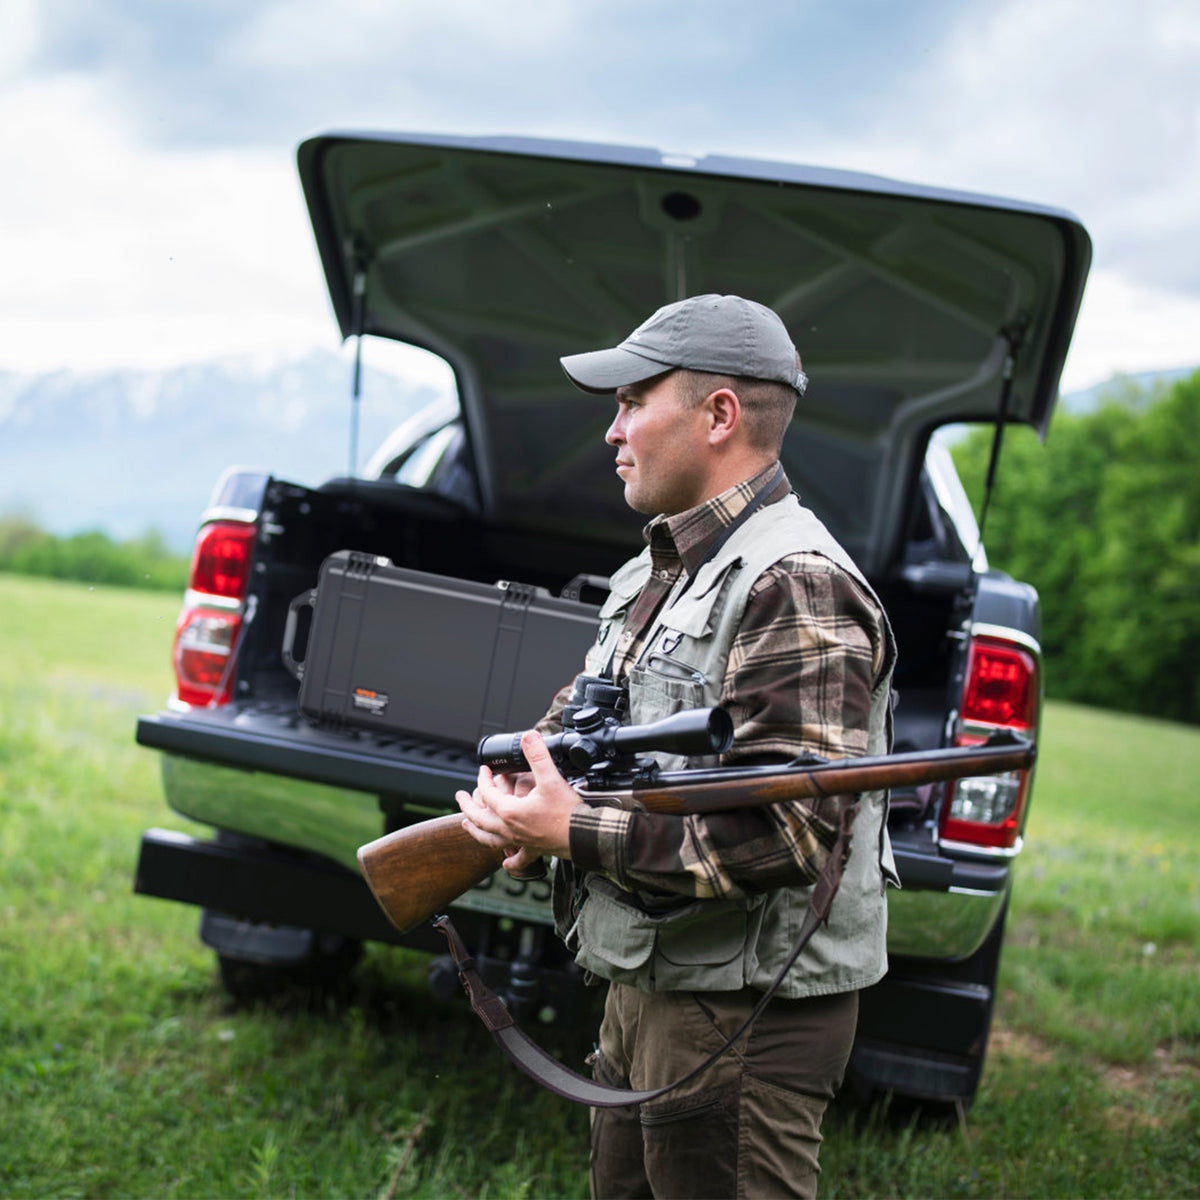 RPNB PP-12150 Weatherproof Hard Rifle Case with Customizable Foam Insert In the Back of a Truck